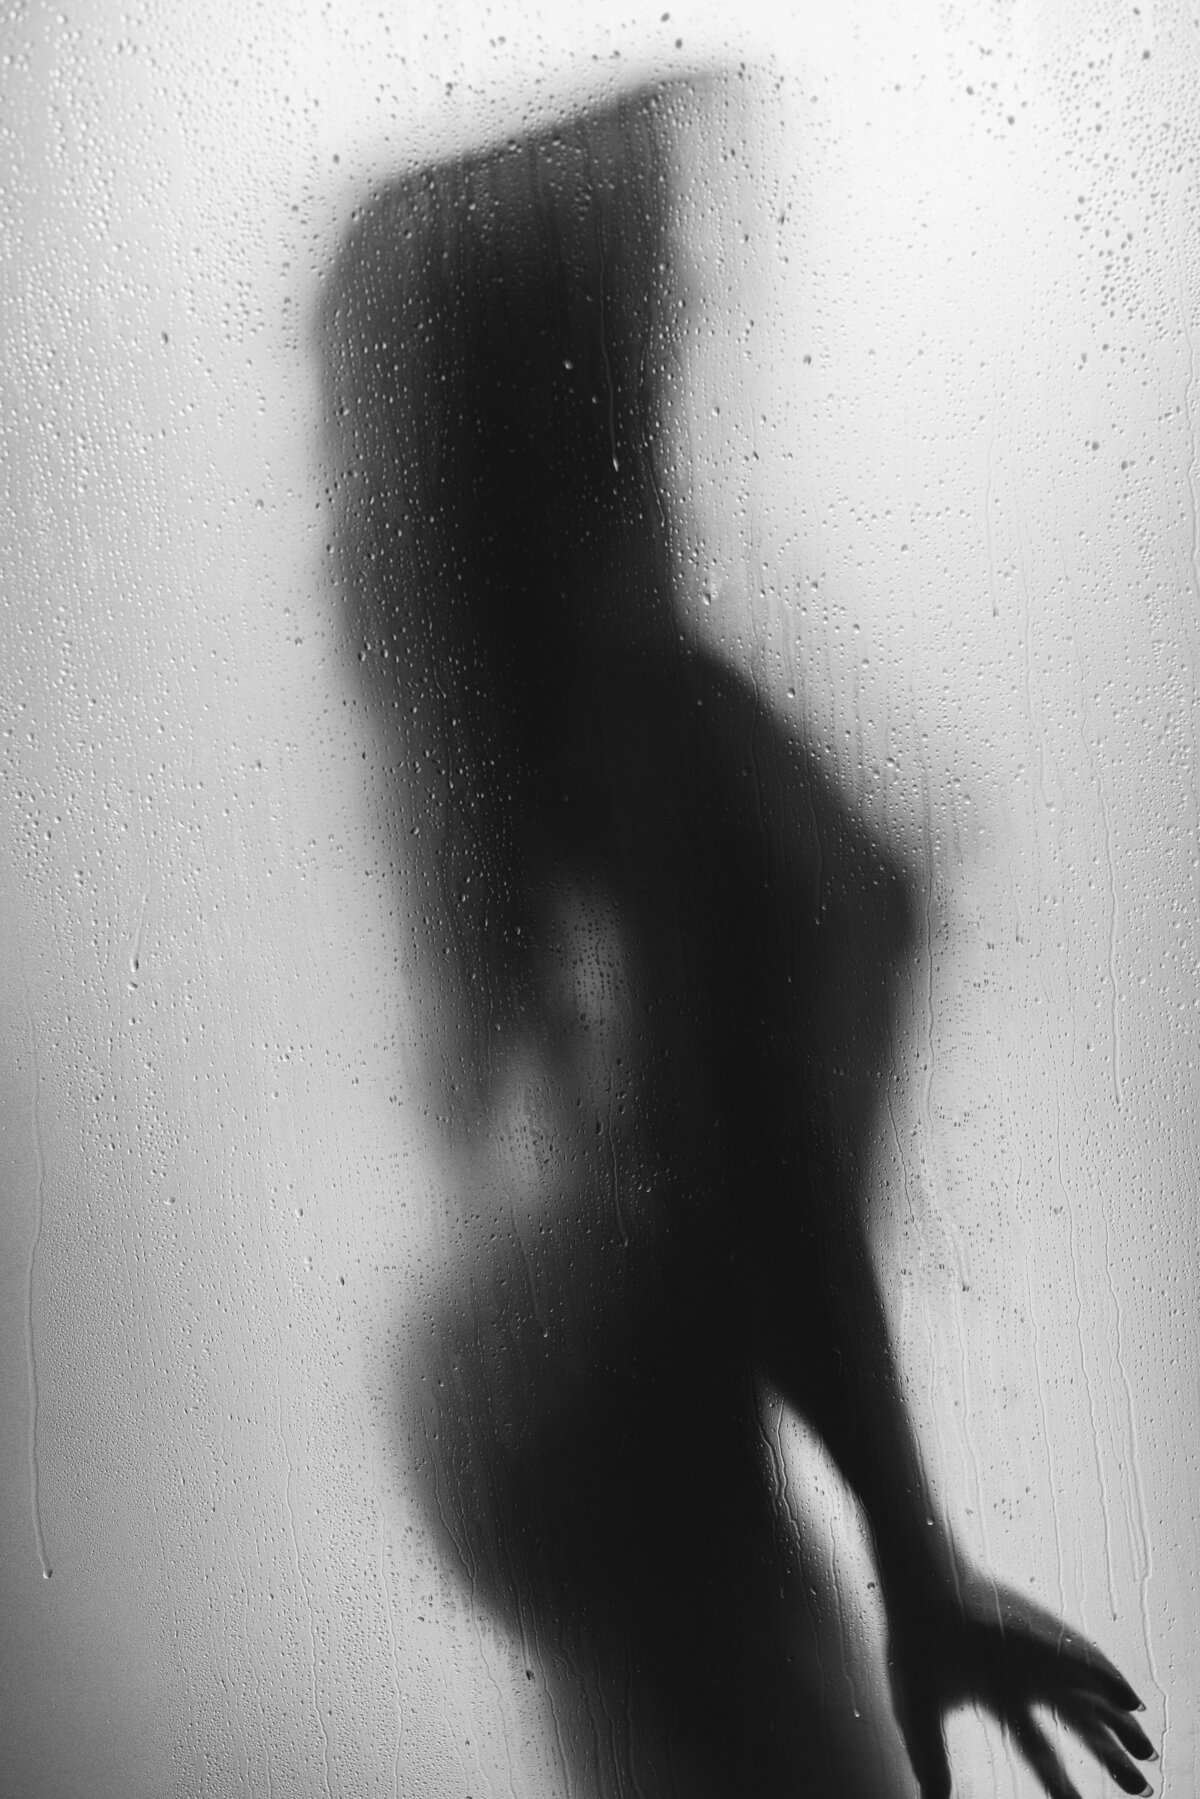 Female silhouette behind a shower door with her hand stretched out